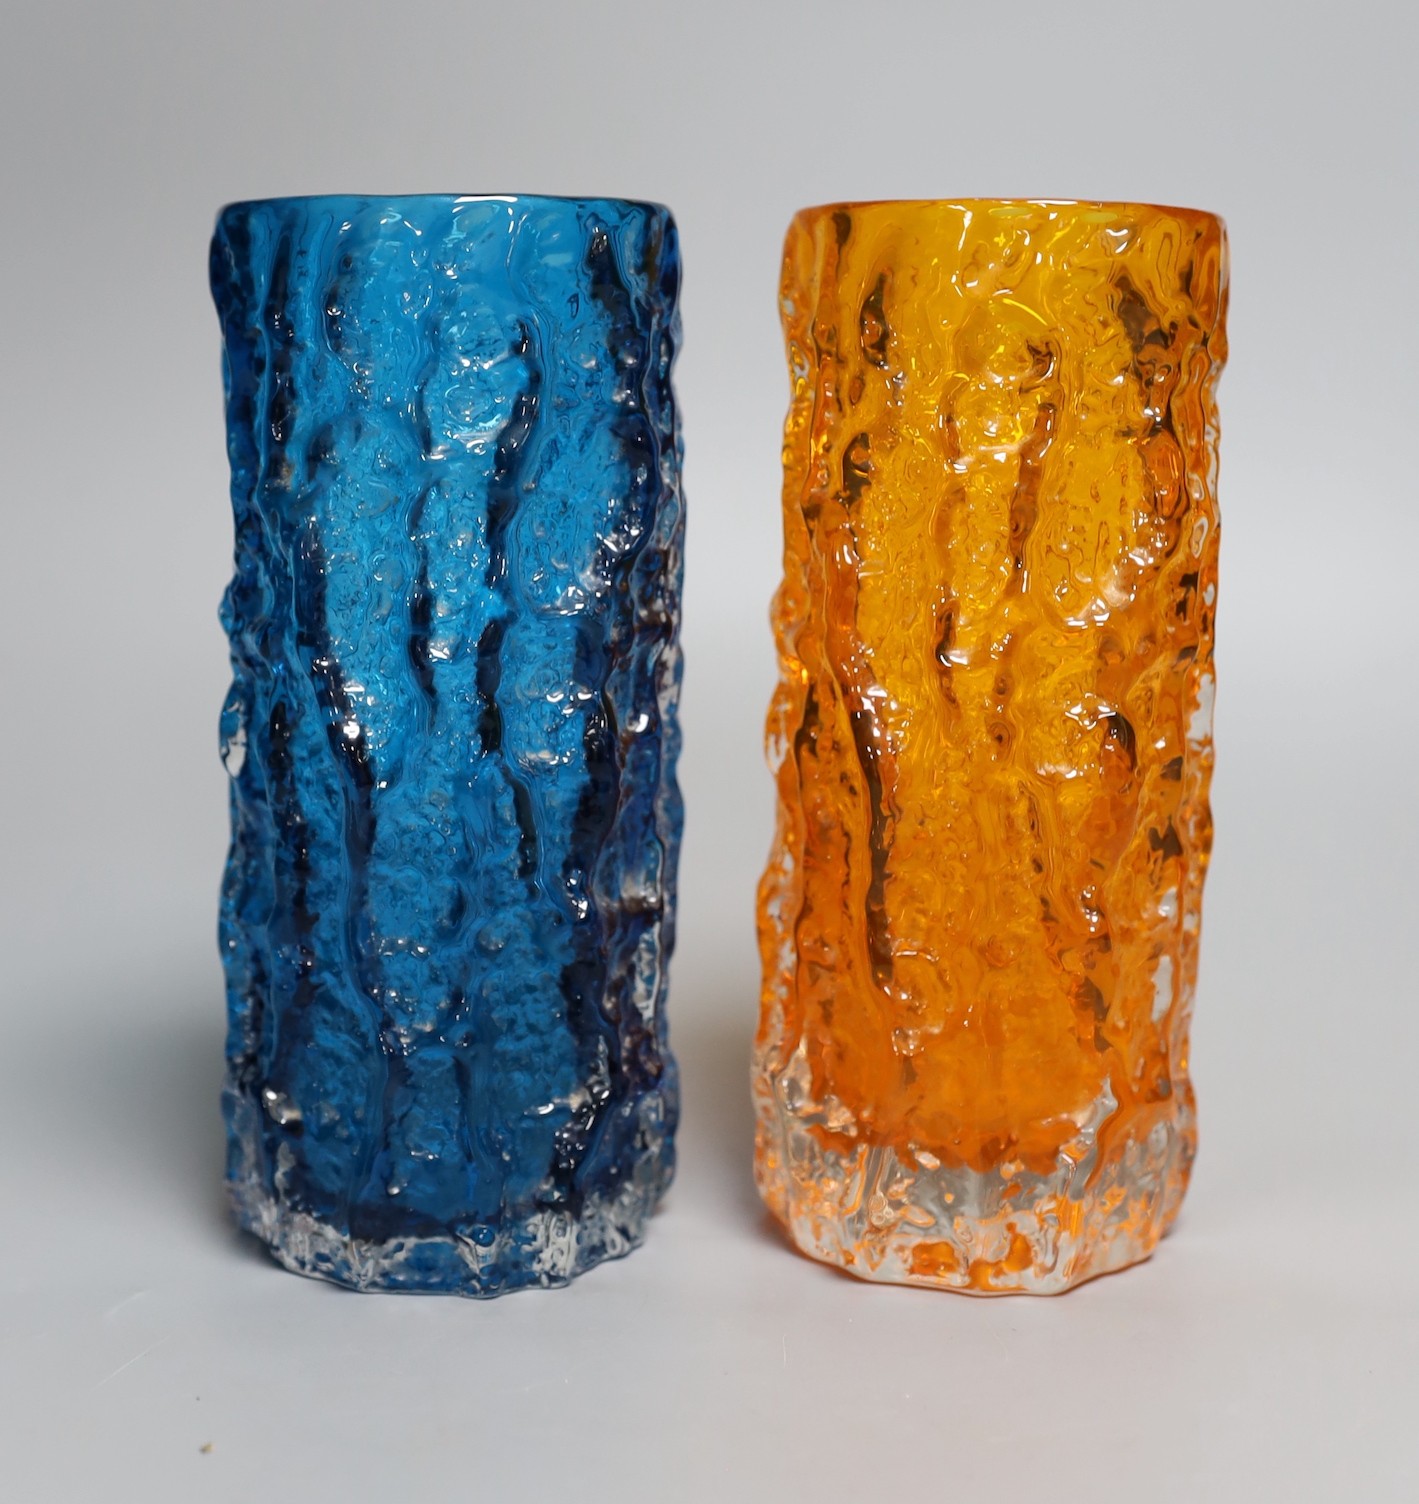 Two Whitefriars 'bark' cylinder vases, model 9689 designed by Geoffrey Baxter in 'tangerine' and 'kingfisher blue' glass, each 19cm high.